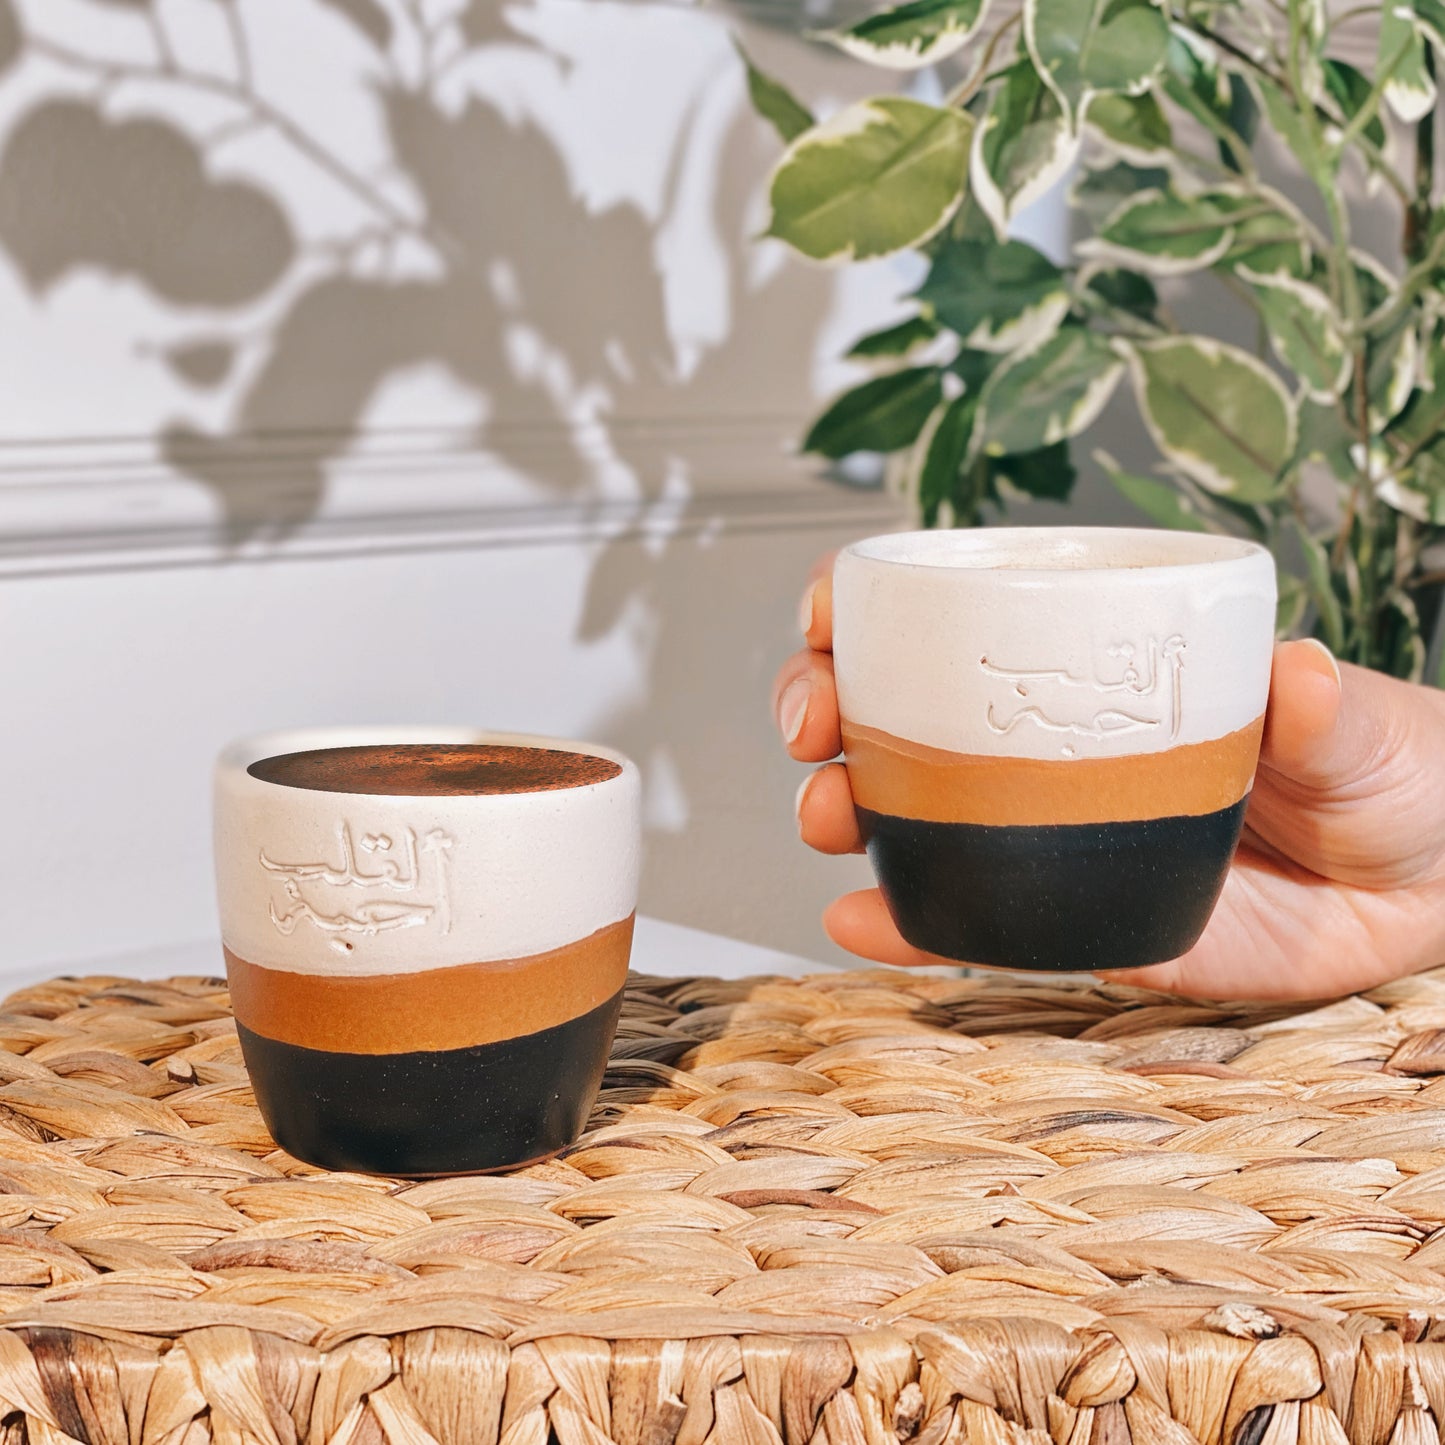 ”For Heart I Love” espresso cup set
